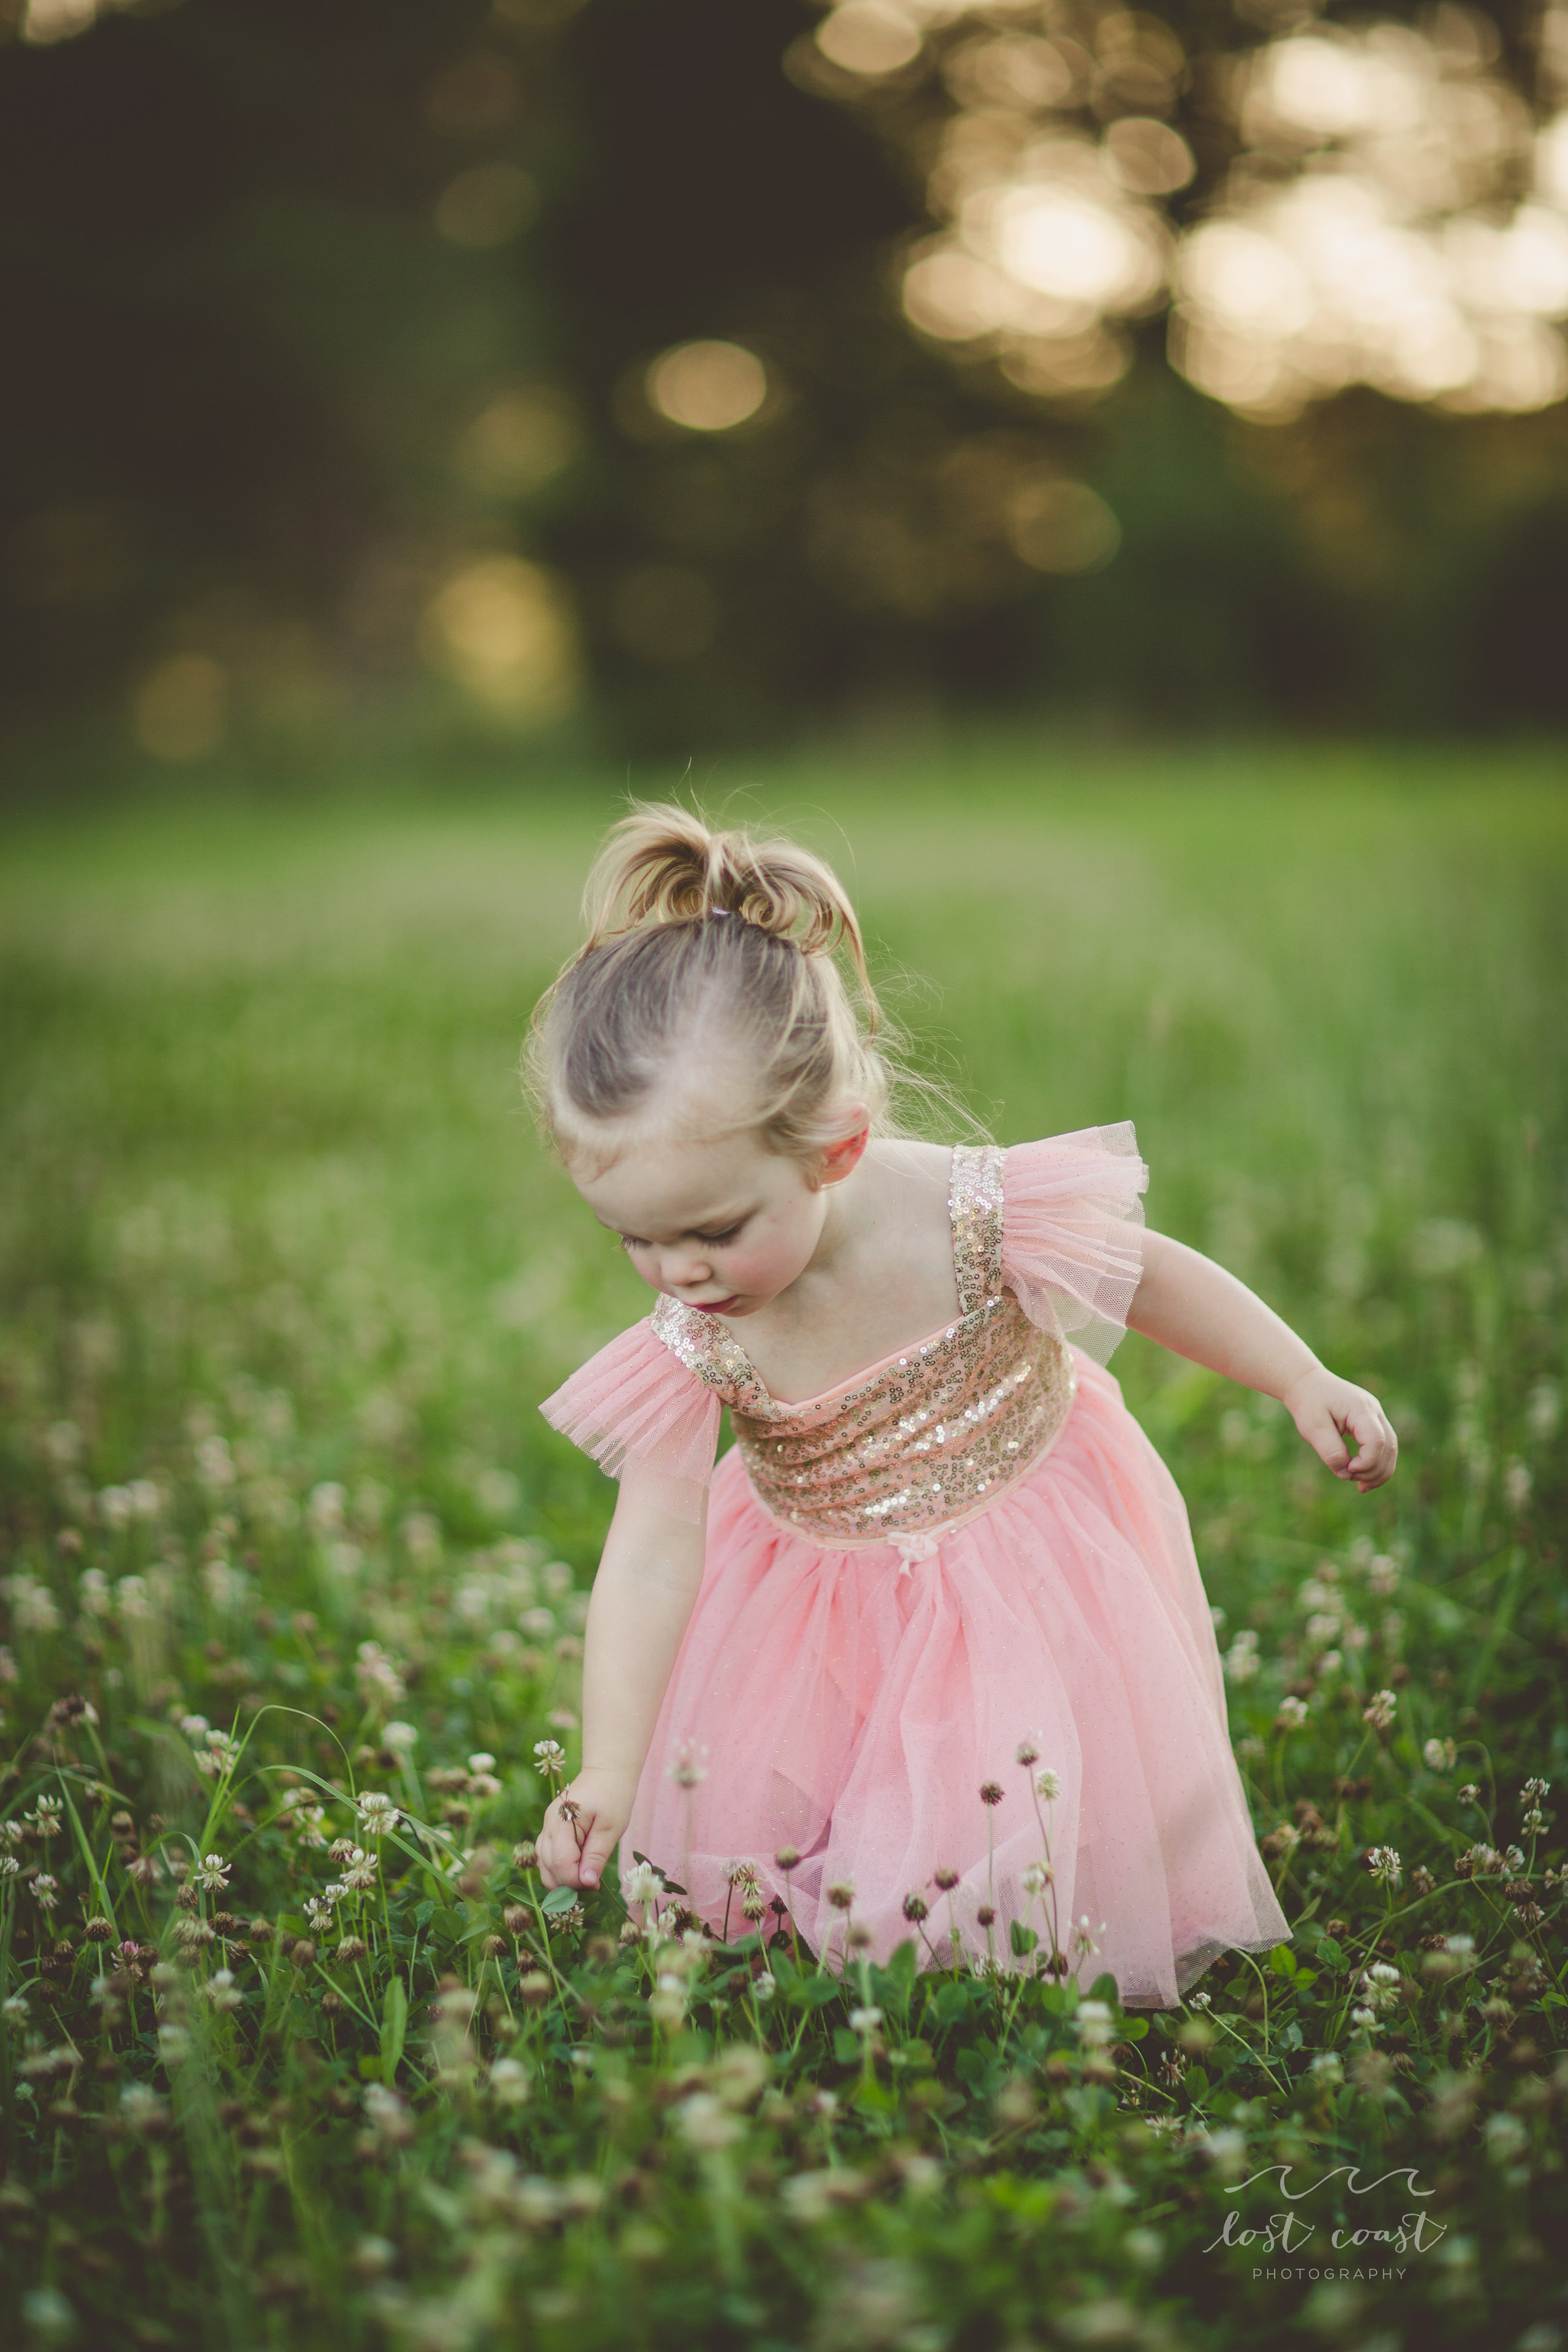 A Daddy Daughter Photo Session — The Overwhelmed Mommy Blog